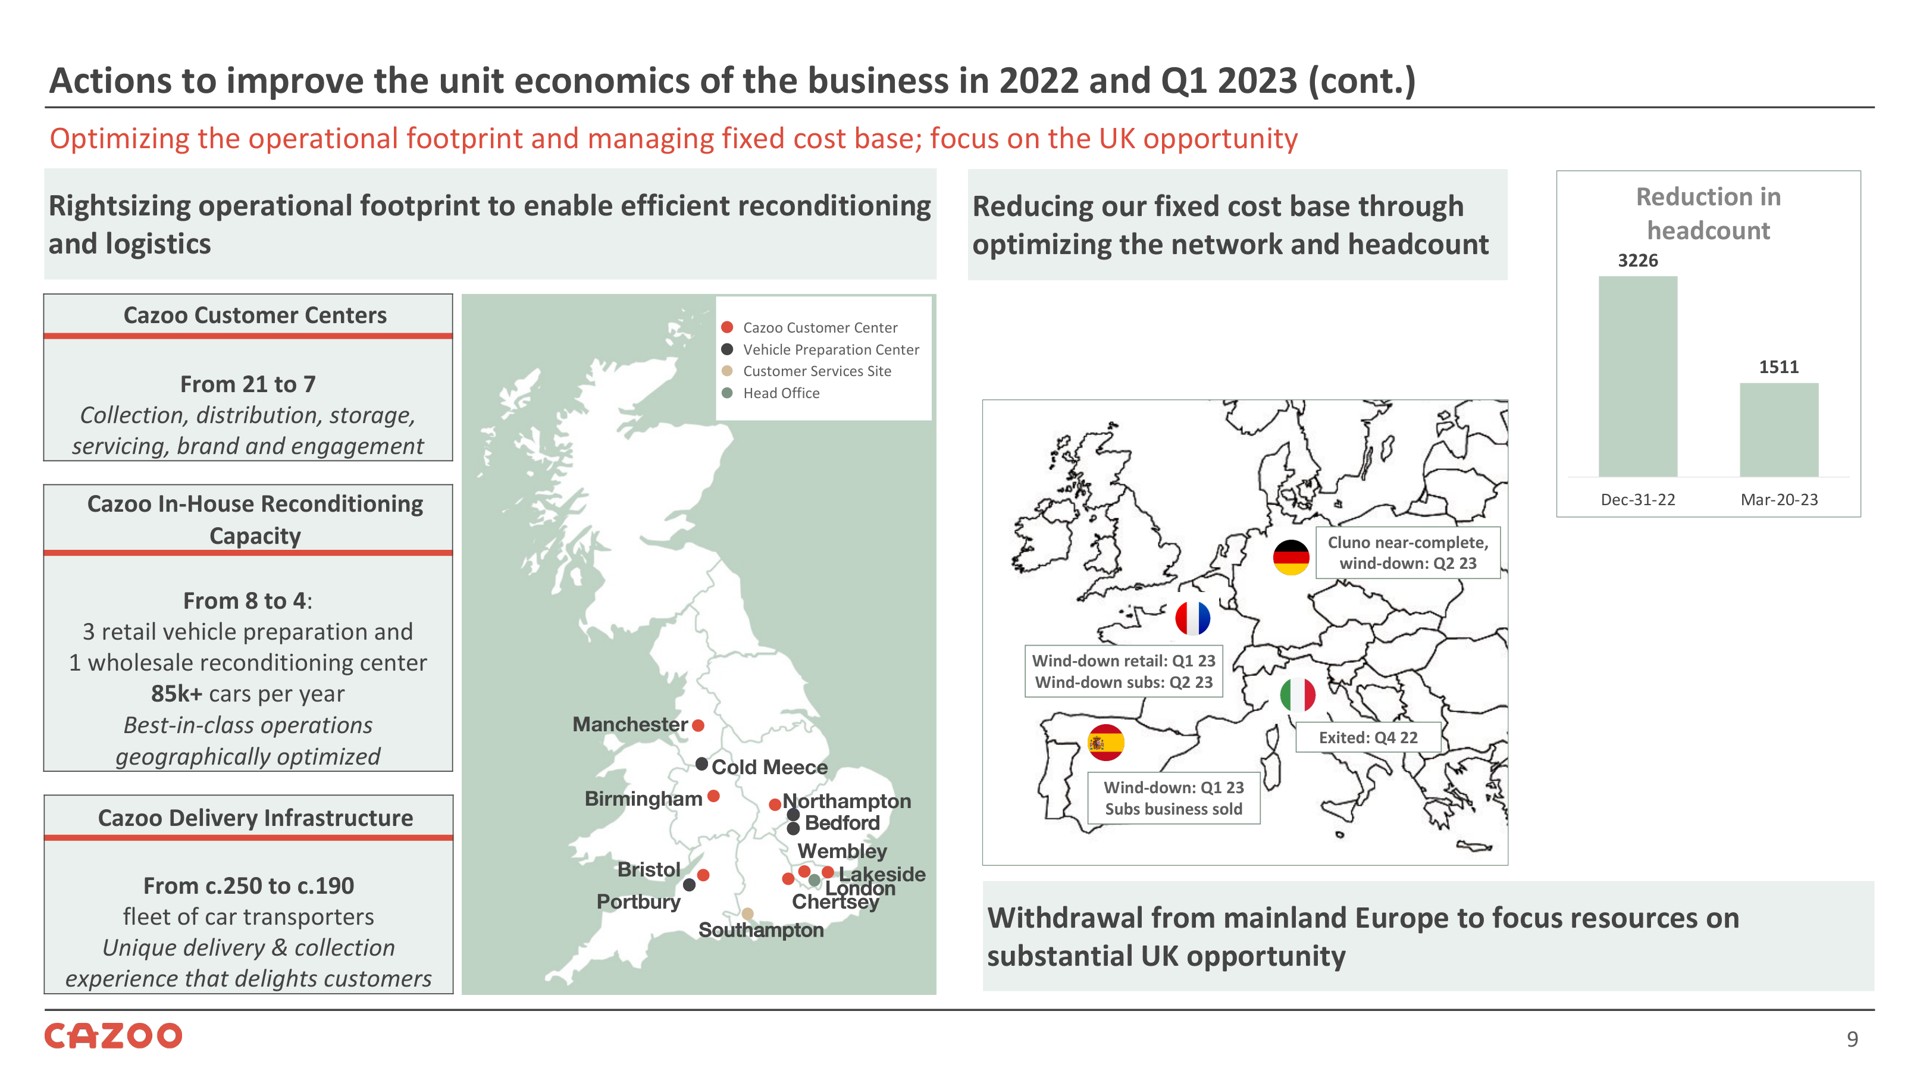 actions to improve the unit economics of the business in and operational footprint enable efficient reconditioning reducing our fixed cost base through logistics optimizing network reduction | Cazoo